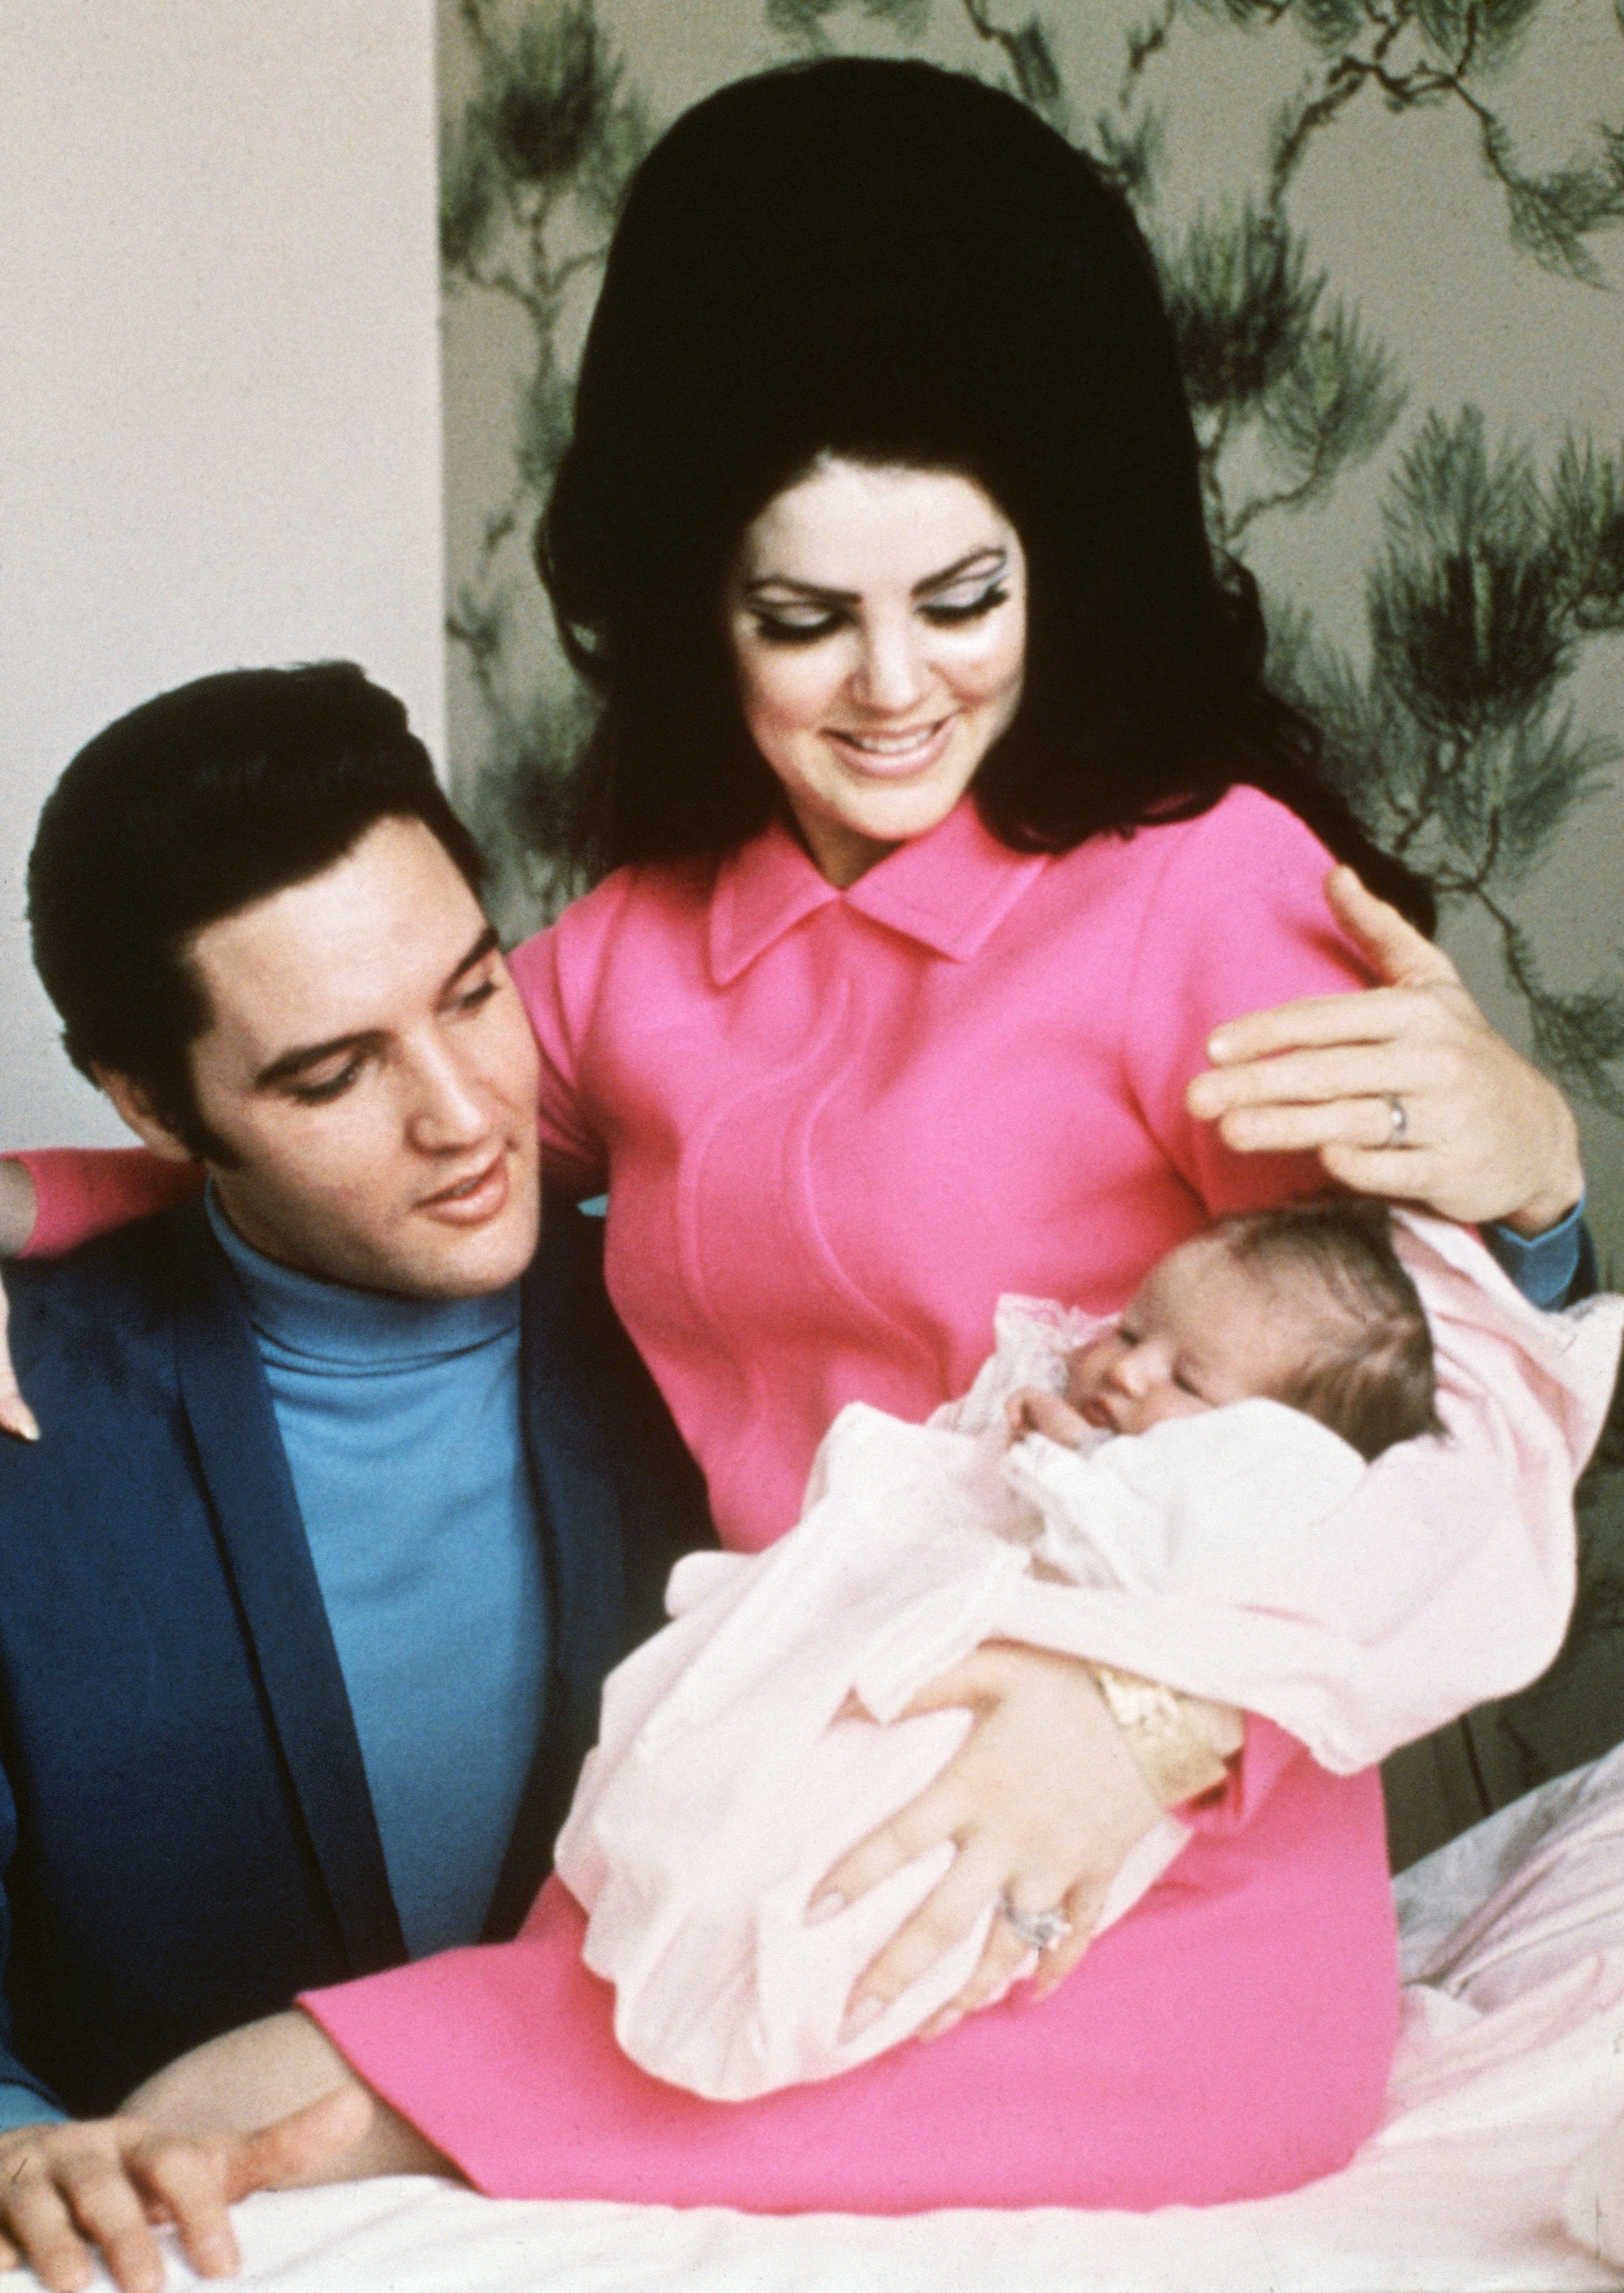 Elvis Presley and his wife, Priscilla Presley, as they prepare to leave the hospital with their new daughter, Lisa Marie Presley, in Memphis, Tennessee, on February 5, 1968 | Source: Getty Images